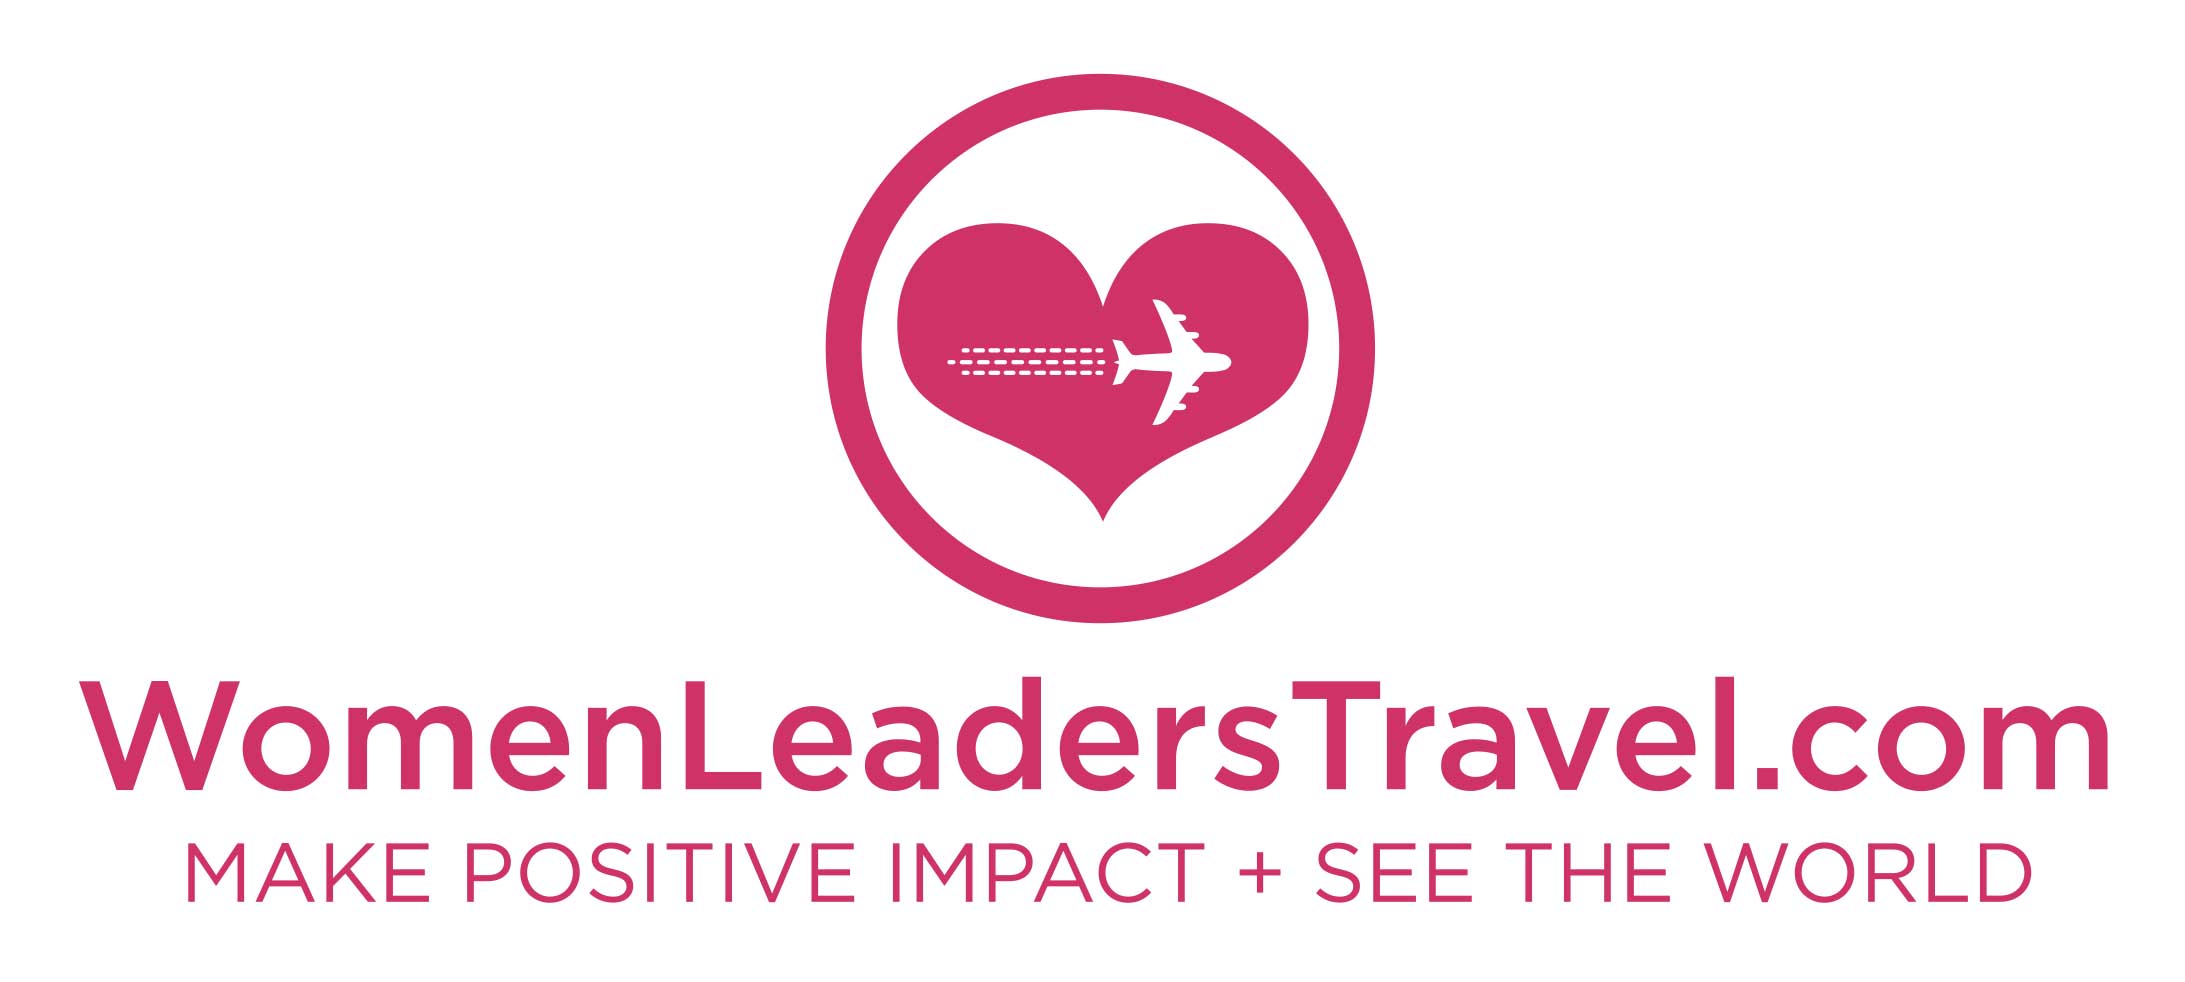 Love to Make a Positive Impact and Travel with Your Community; we collaborate with women leaders to do both www.WomenLeadersTravel.com